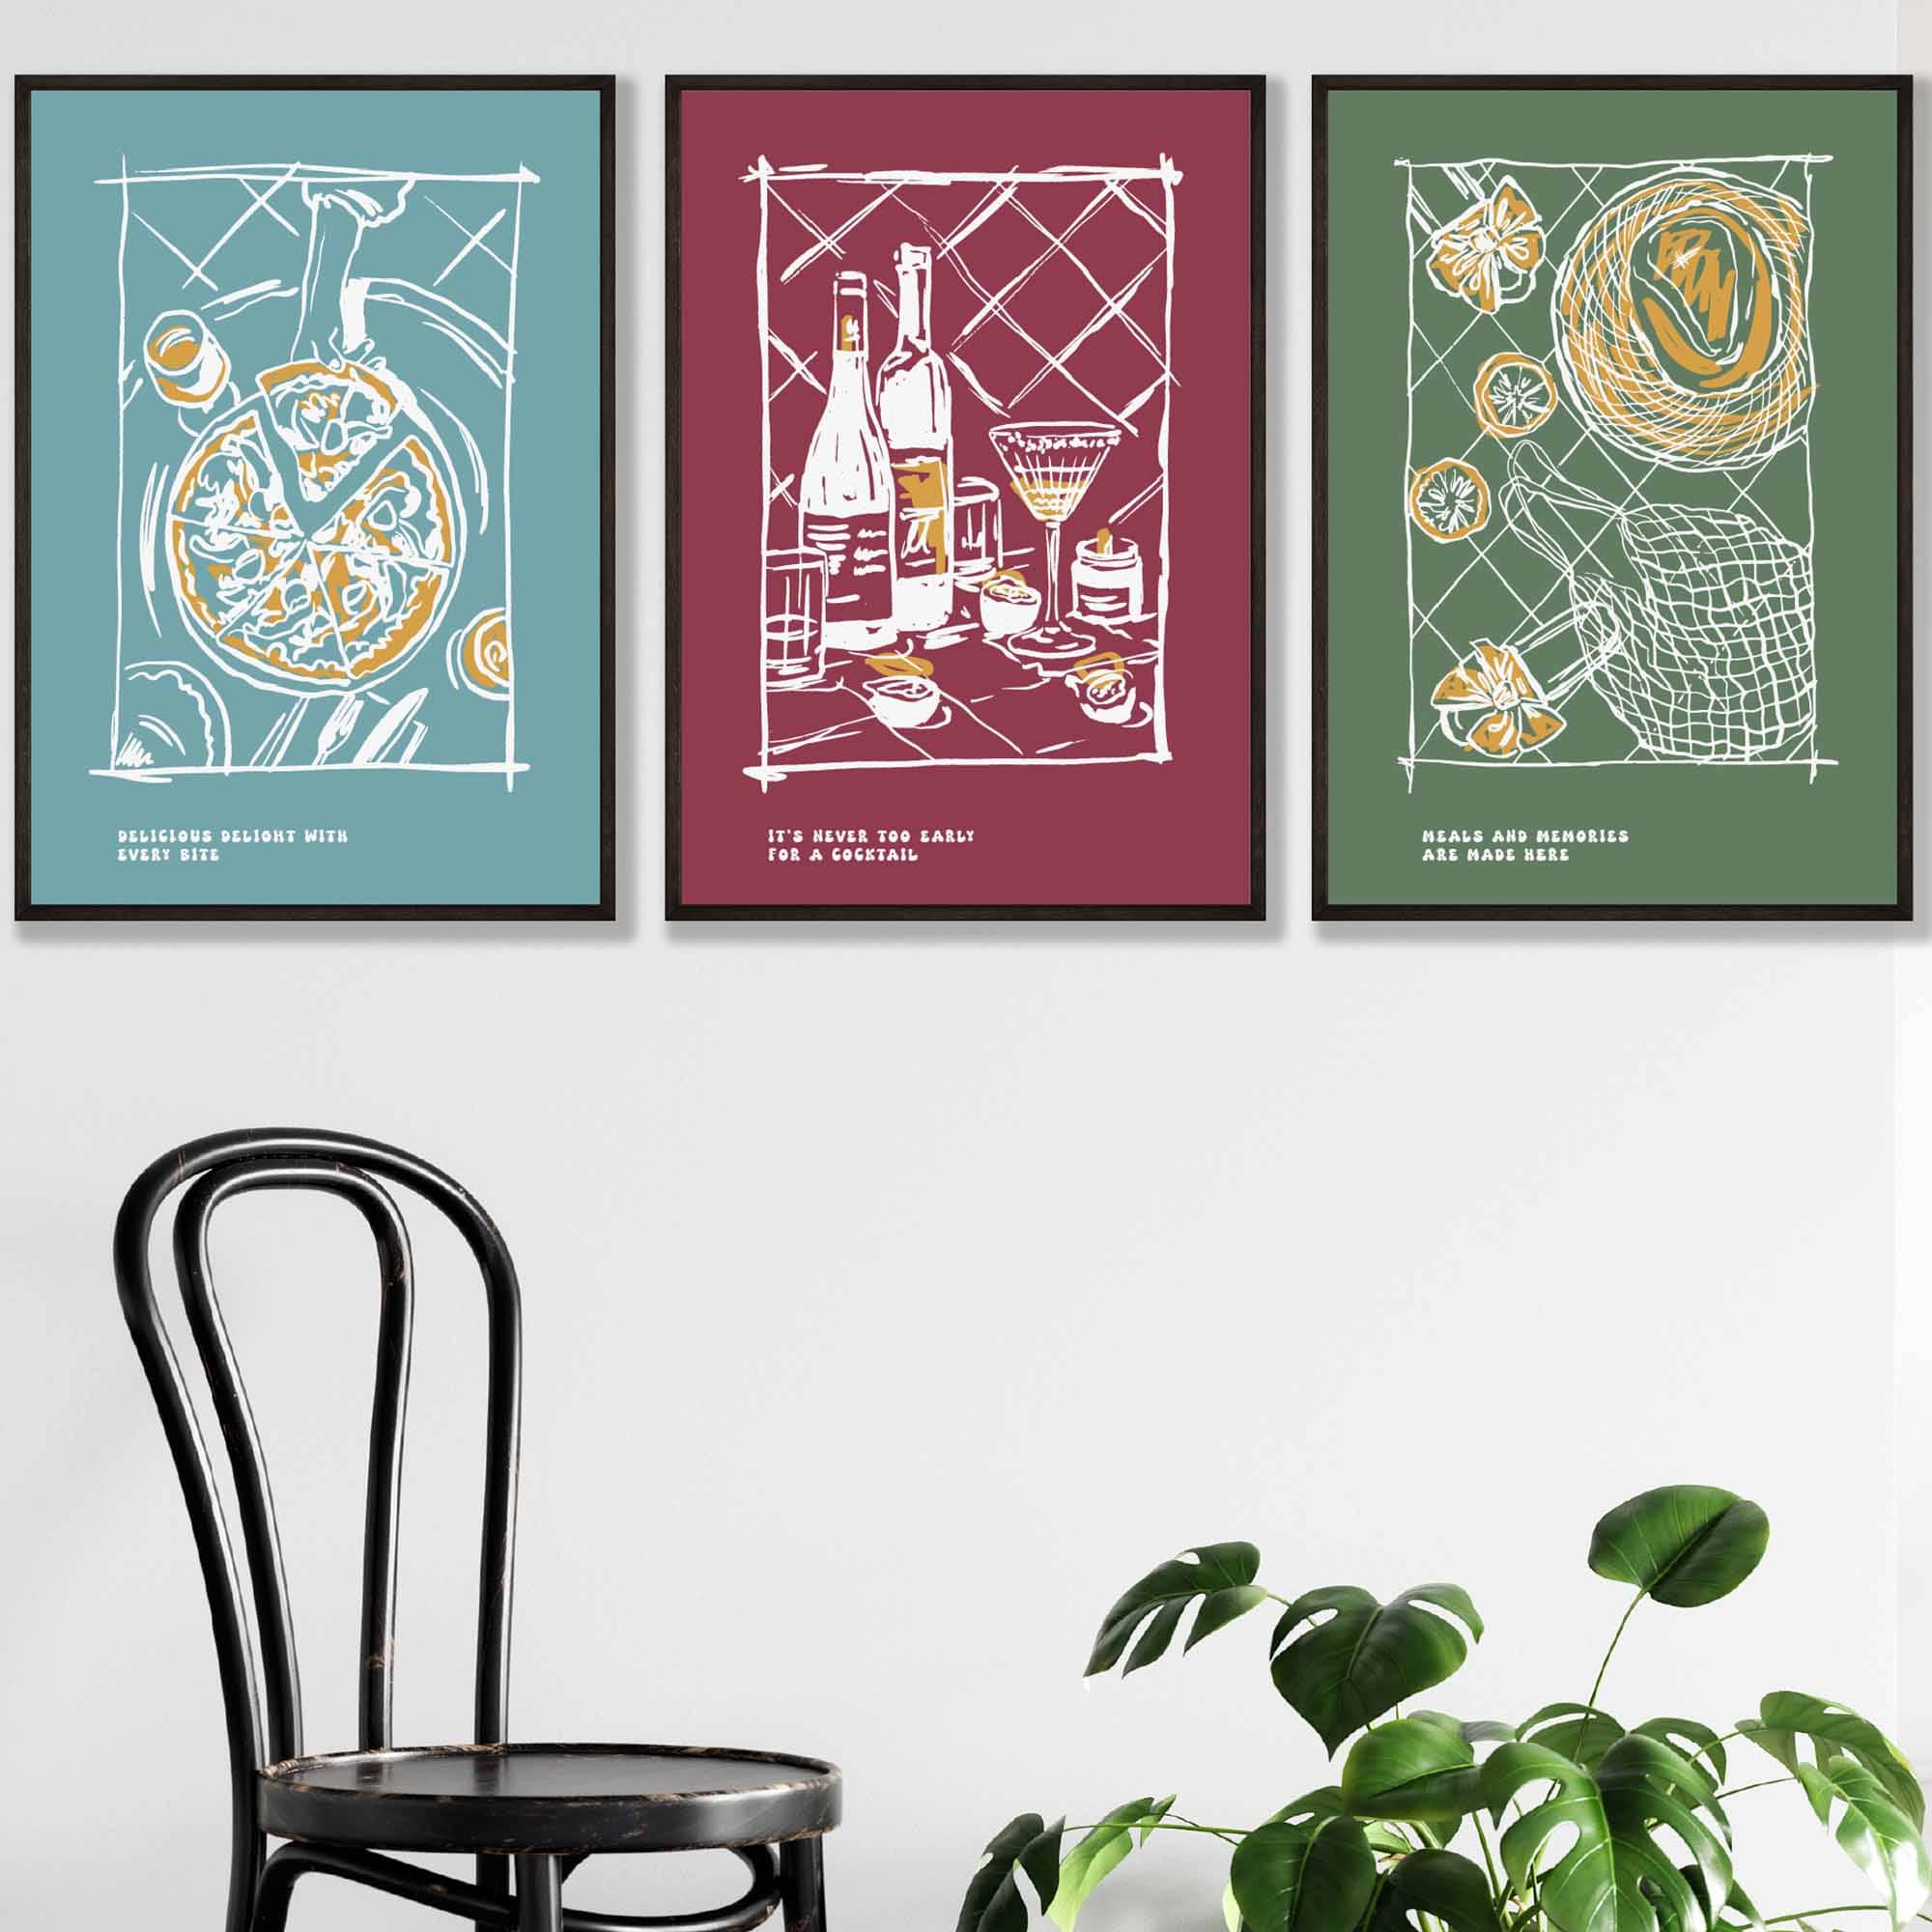 Set of 3 Sketch Line Art Kitchen Quote Prints in Autumn Colours